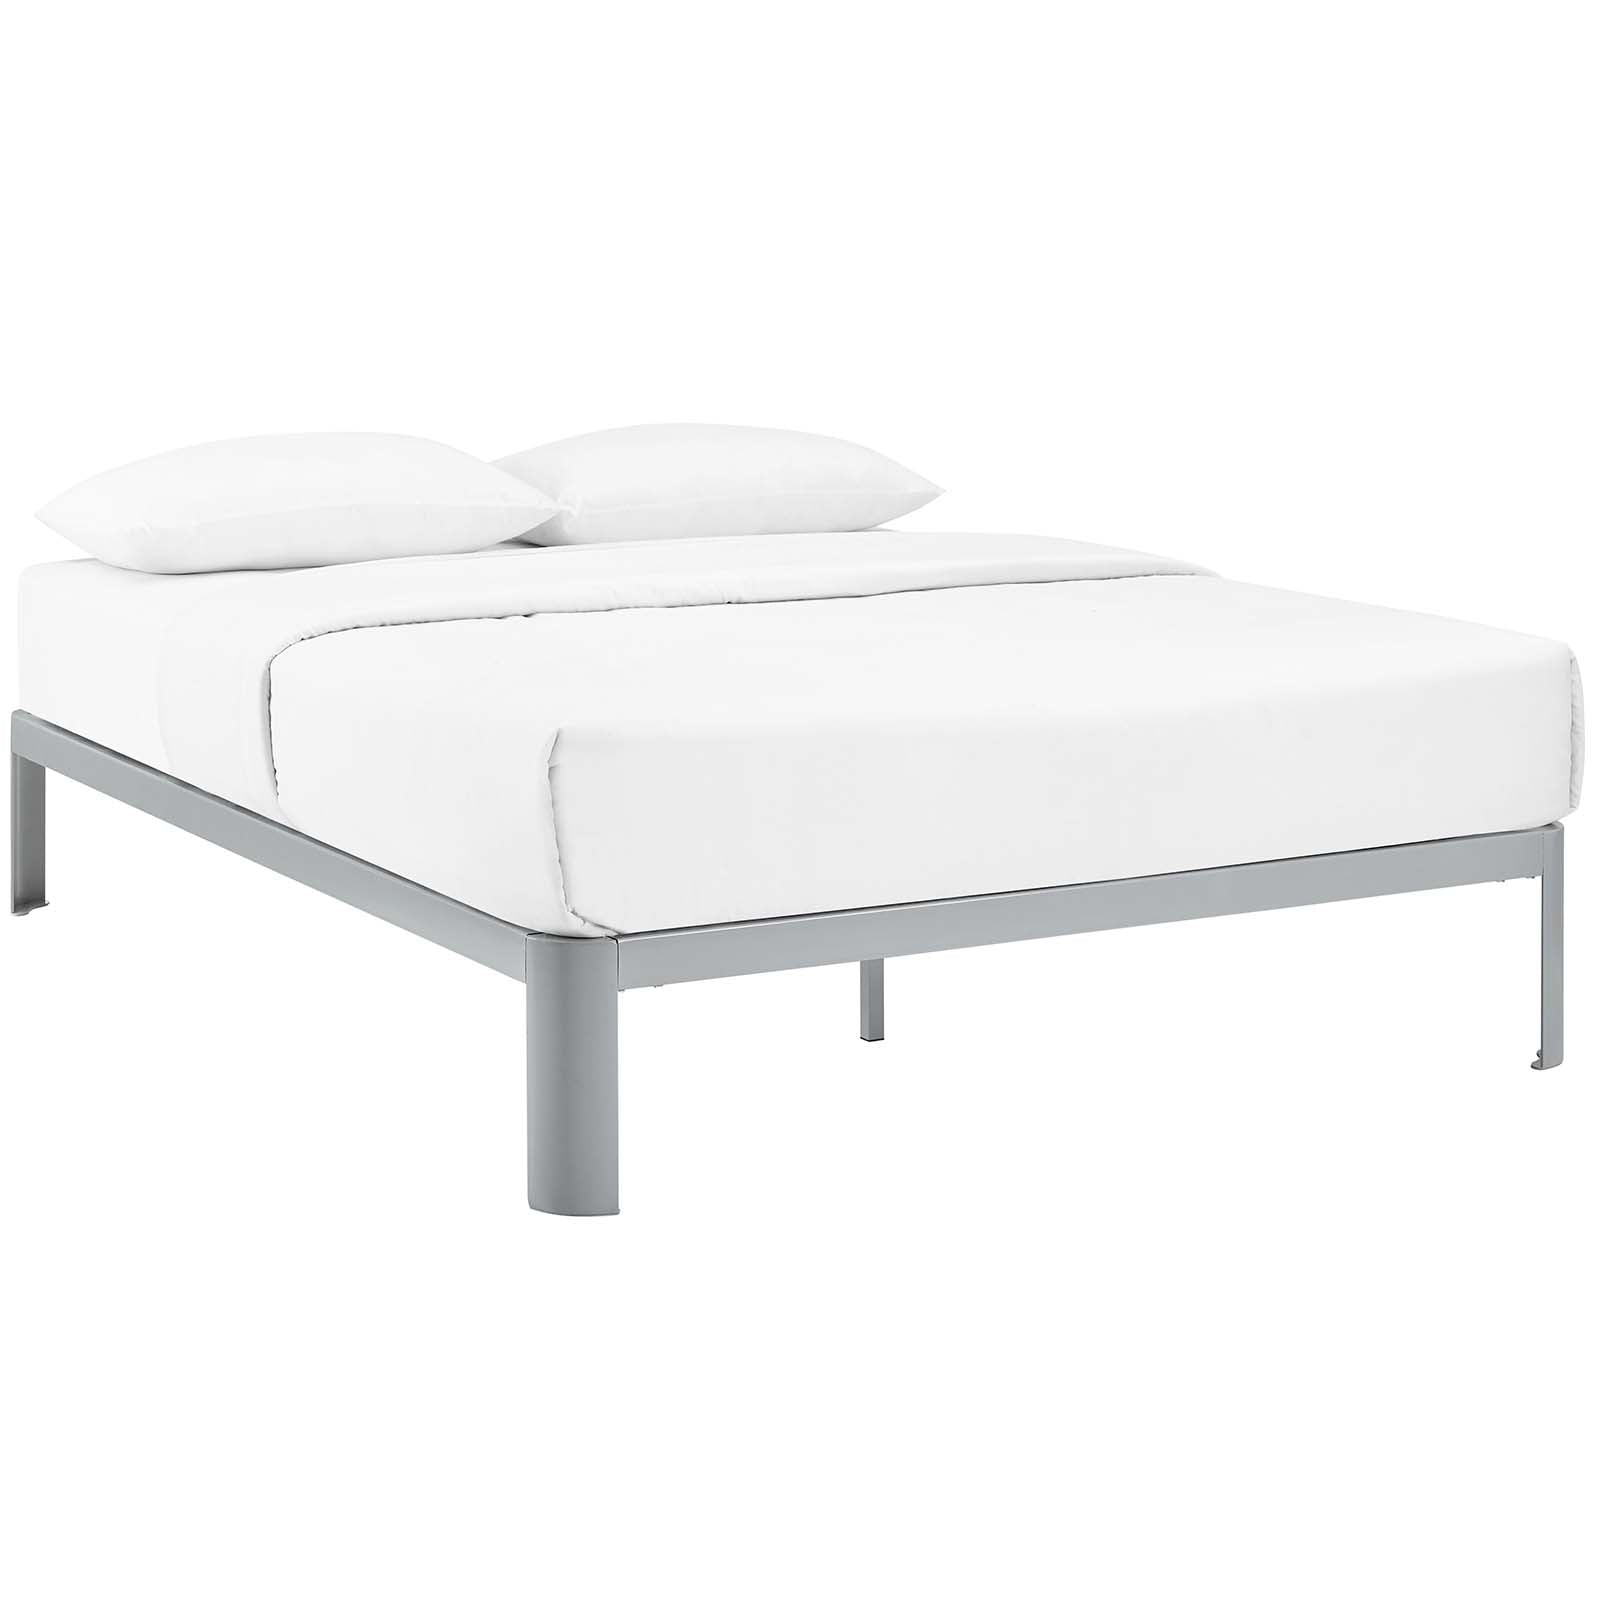 Modway Beds - Corinne Full Bed Frame Gray